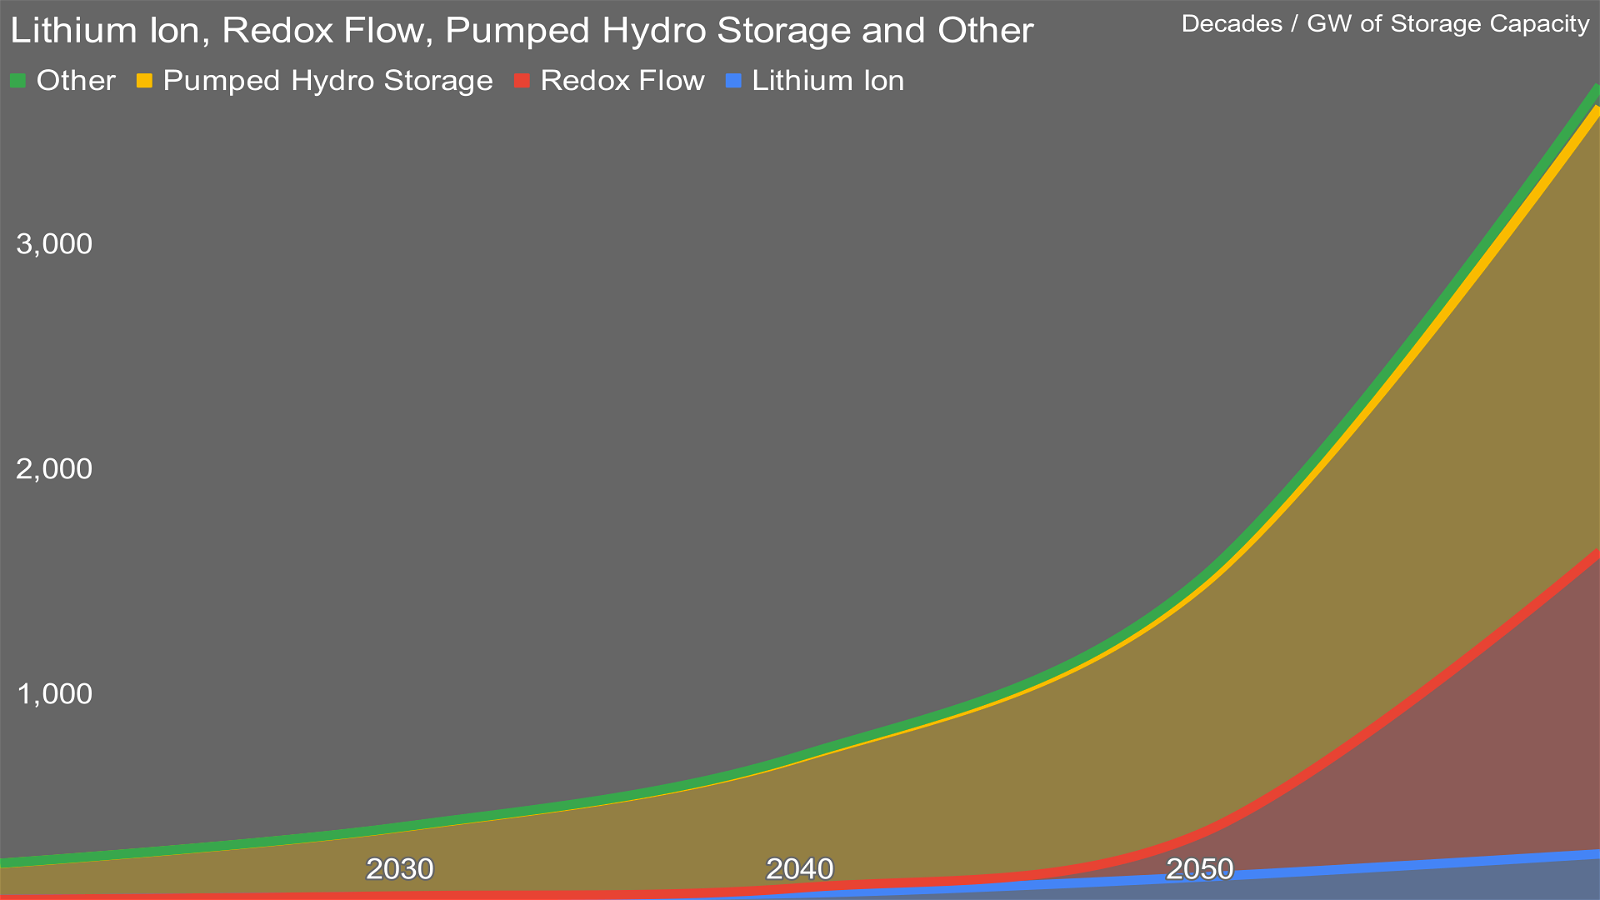 Pumped hydropower storage & redox flow batteries are the untold future of energy